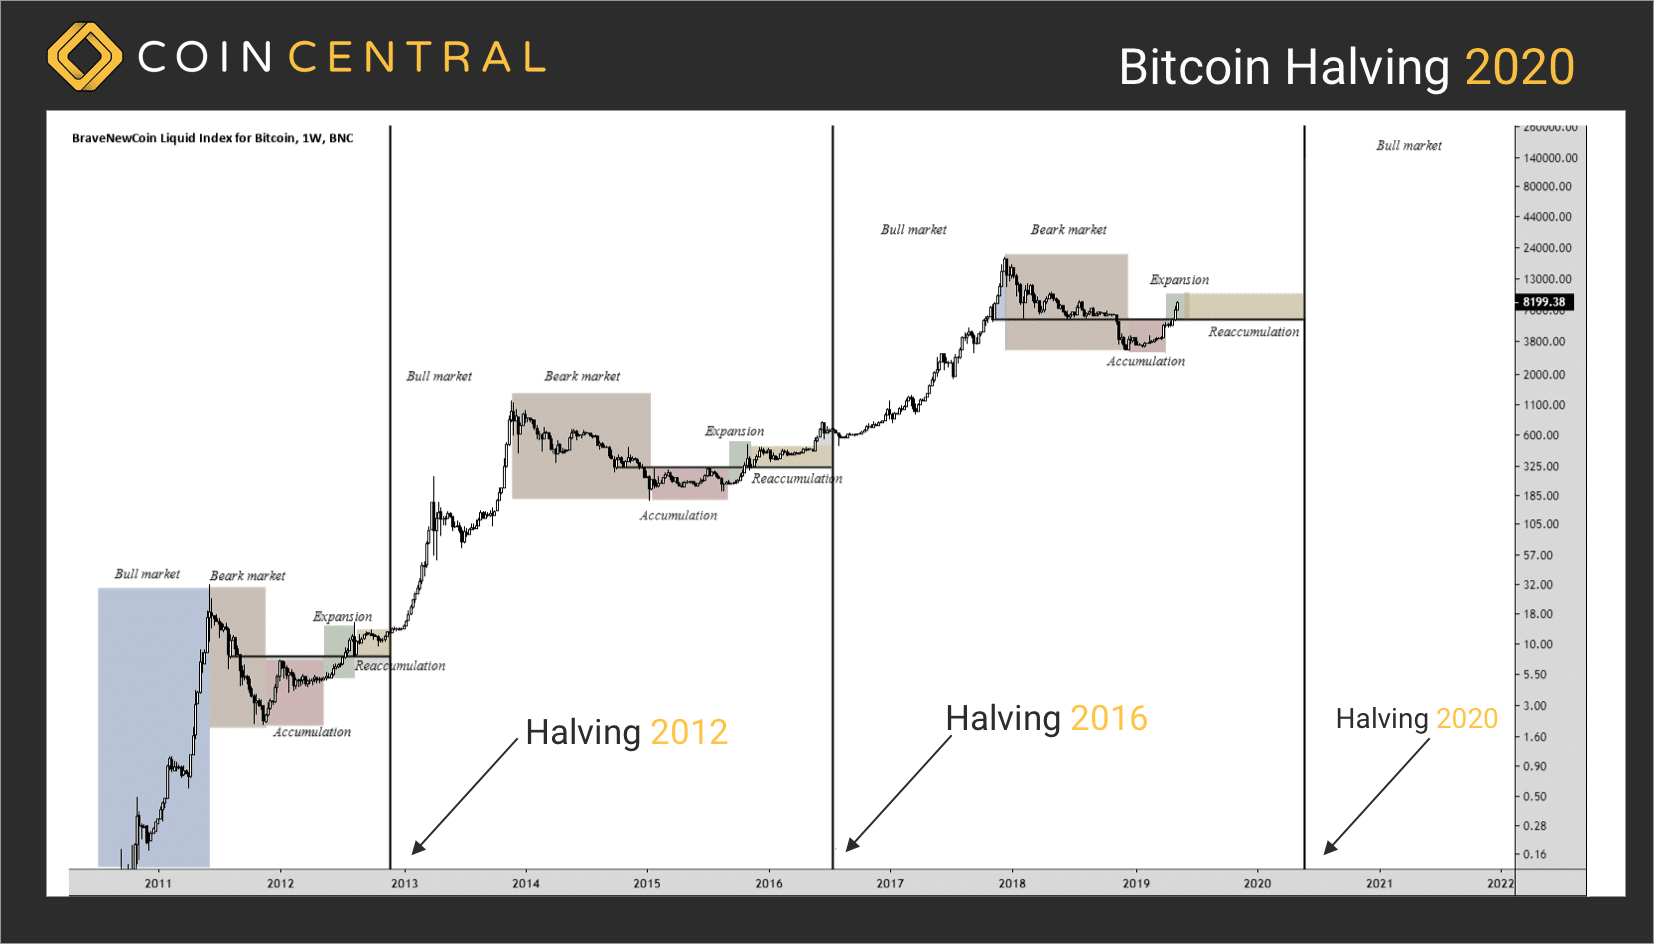 Will there be a price jump after bitcoin halvening 2020? Only time will tell.